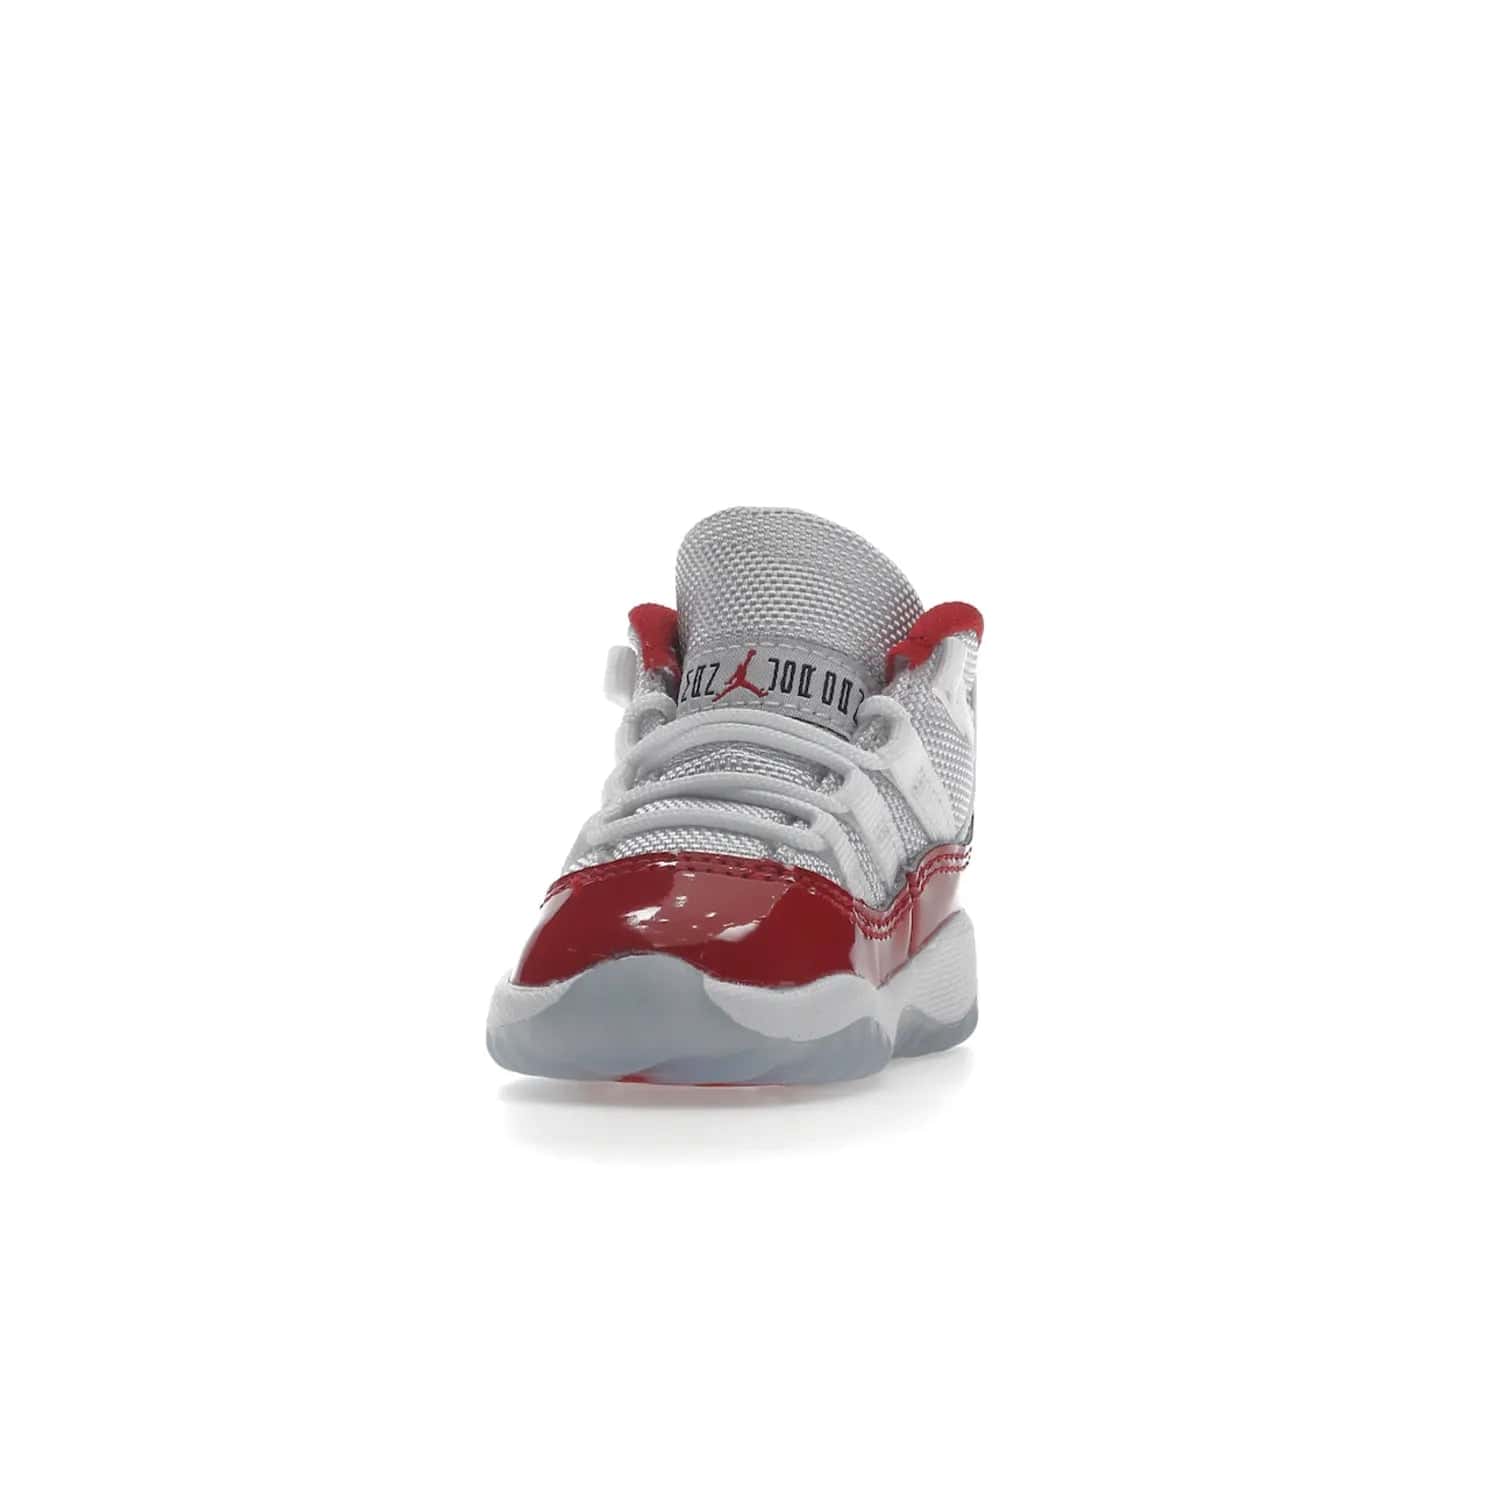 Jordan 11 Retro Cherry (2022) (TD) - Image 12 - Only at www.BallersClubKickz.com - Timeless classic. Air Jordan 11 Retro Cherry 2022 TD combines mesh, leather & suede for a unique look. White upper with varsity red suede. Jumpman logo on collar & tongue. Available Dec 10th, priced at $80.